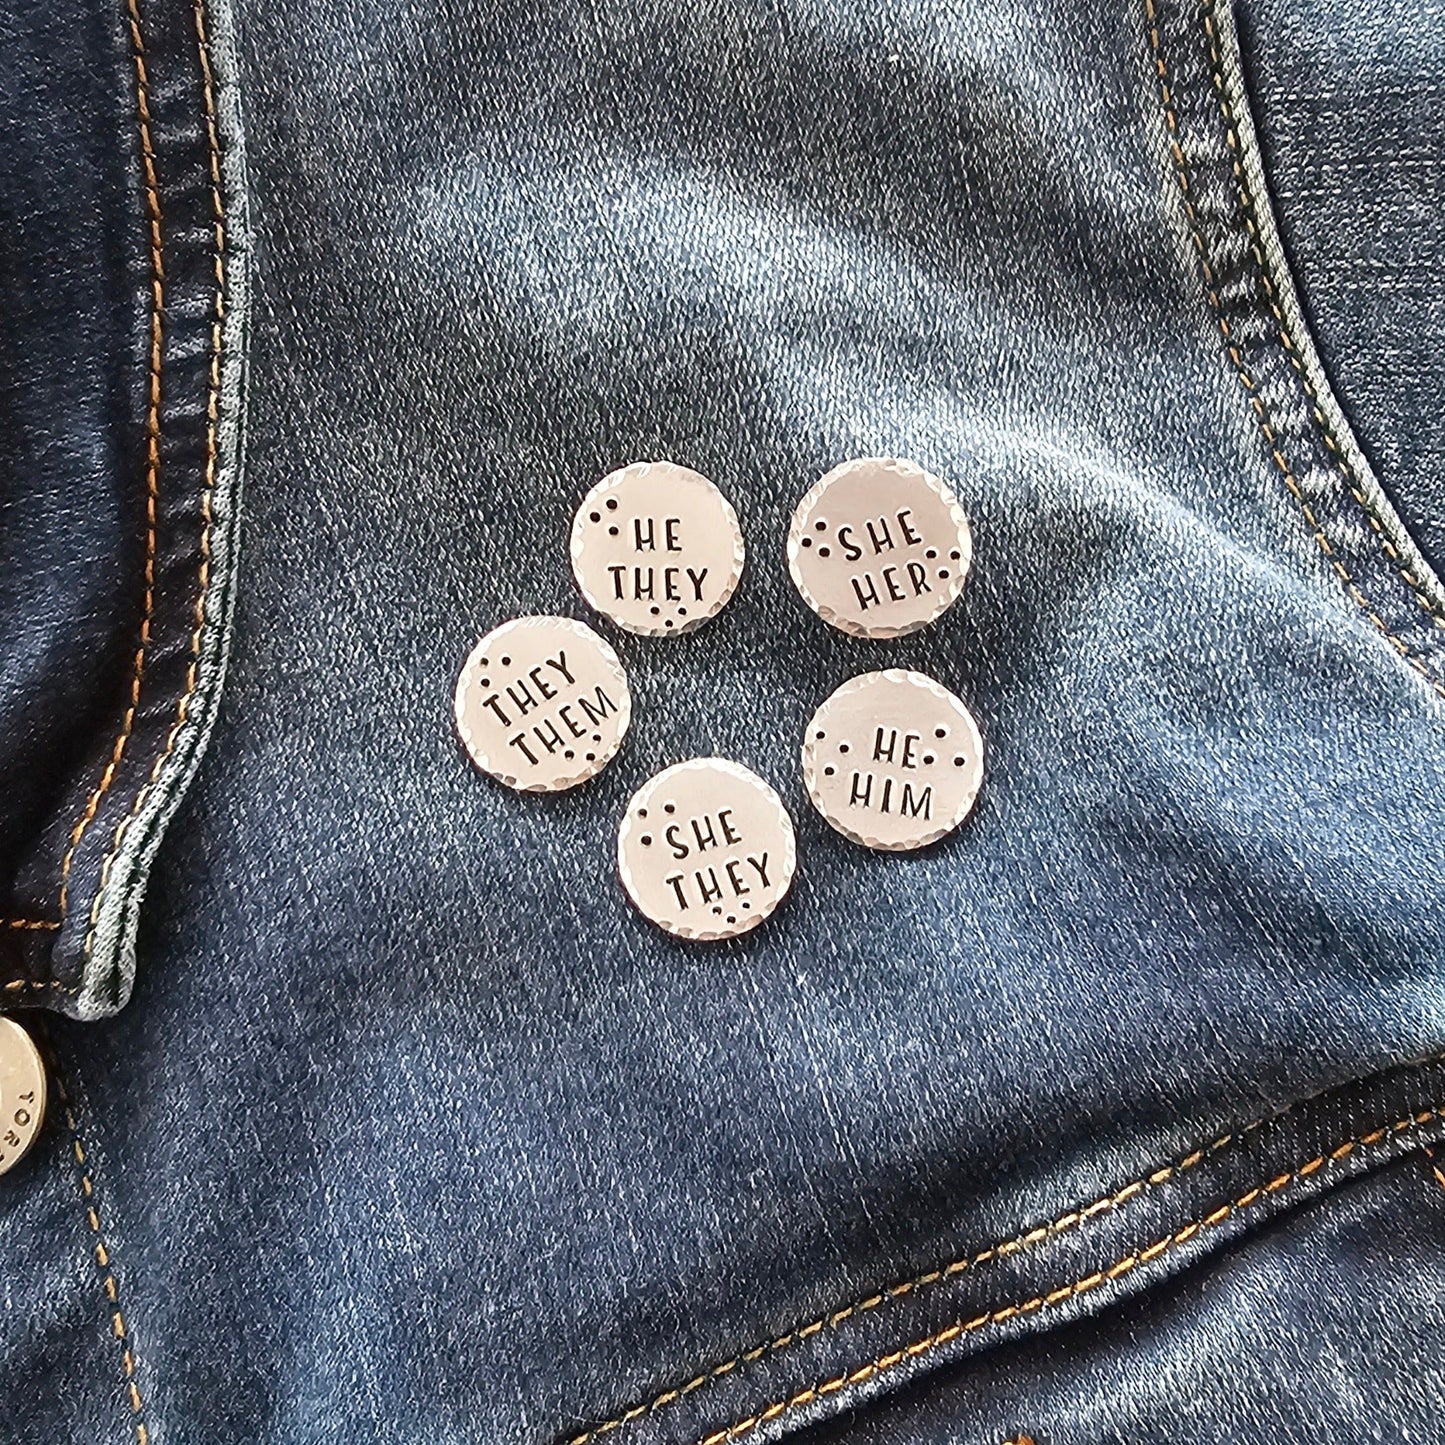 5 silver disc pins on a jean jacket. Each pin has different pronouns hand stamped onto the disc. They them, He They, She Her, She They, and He Him